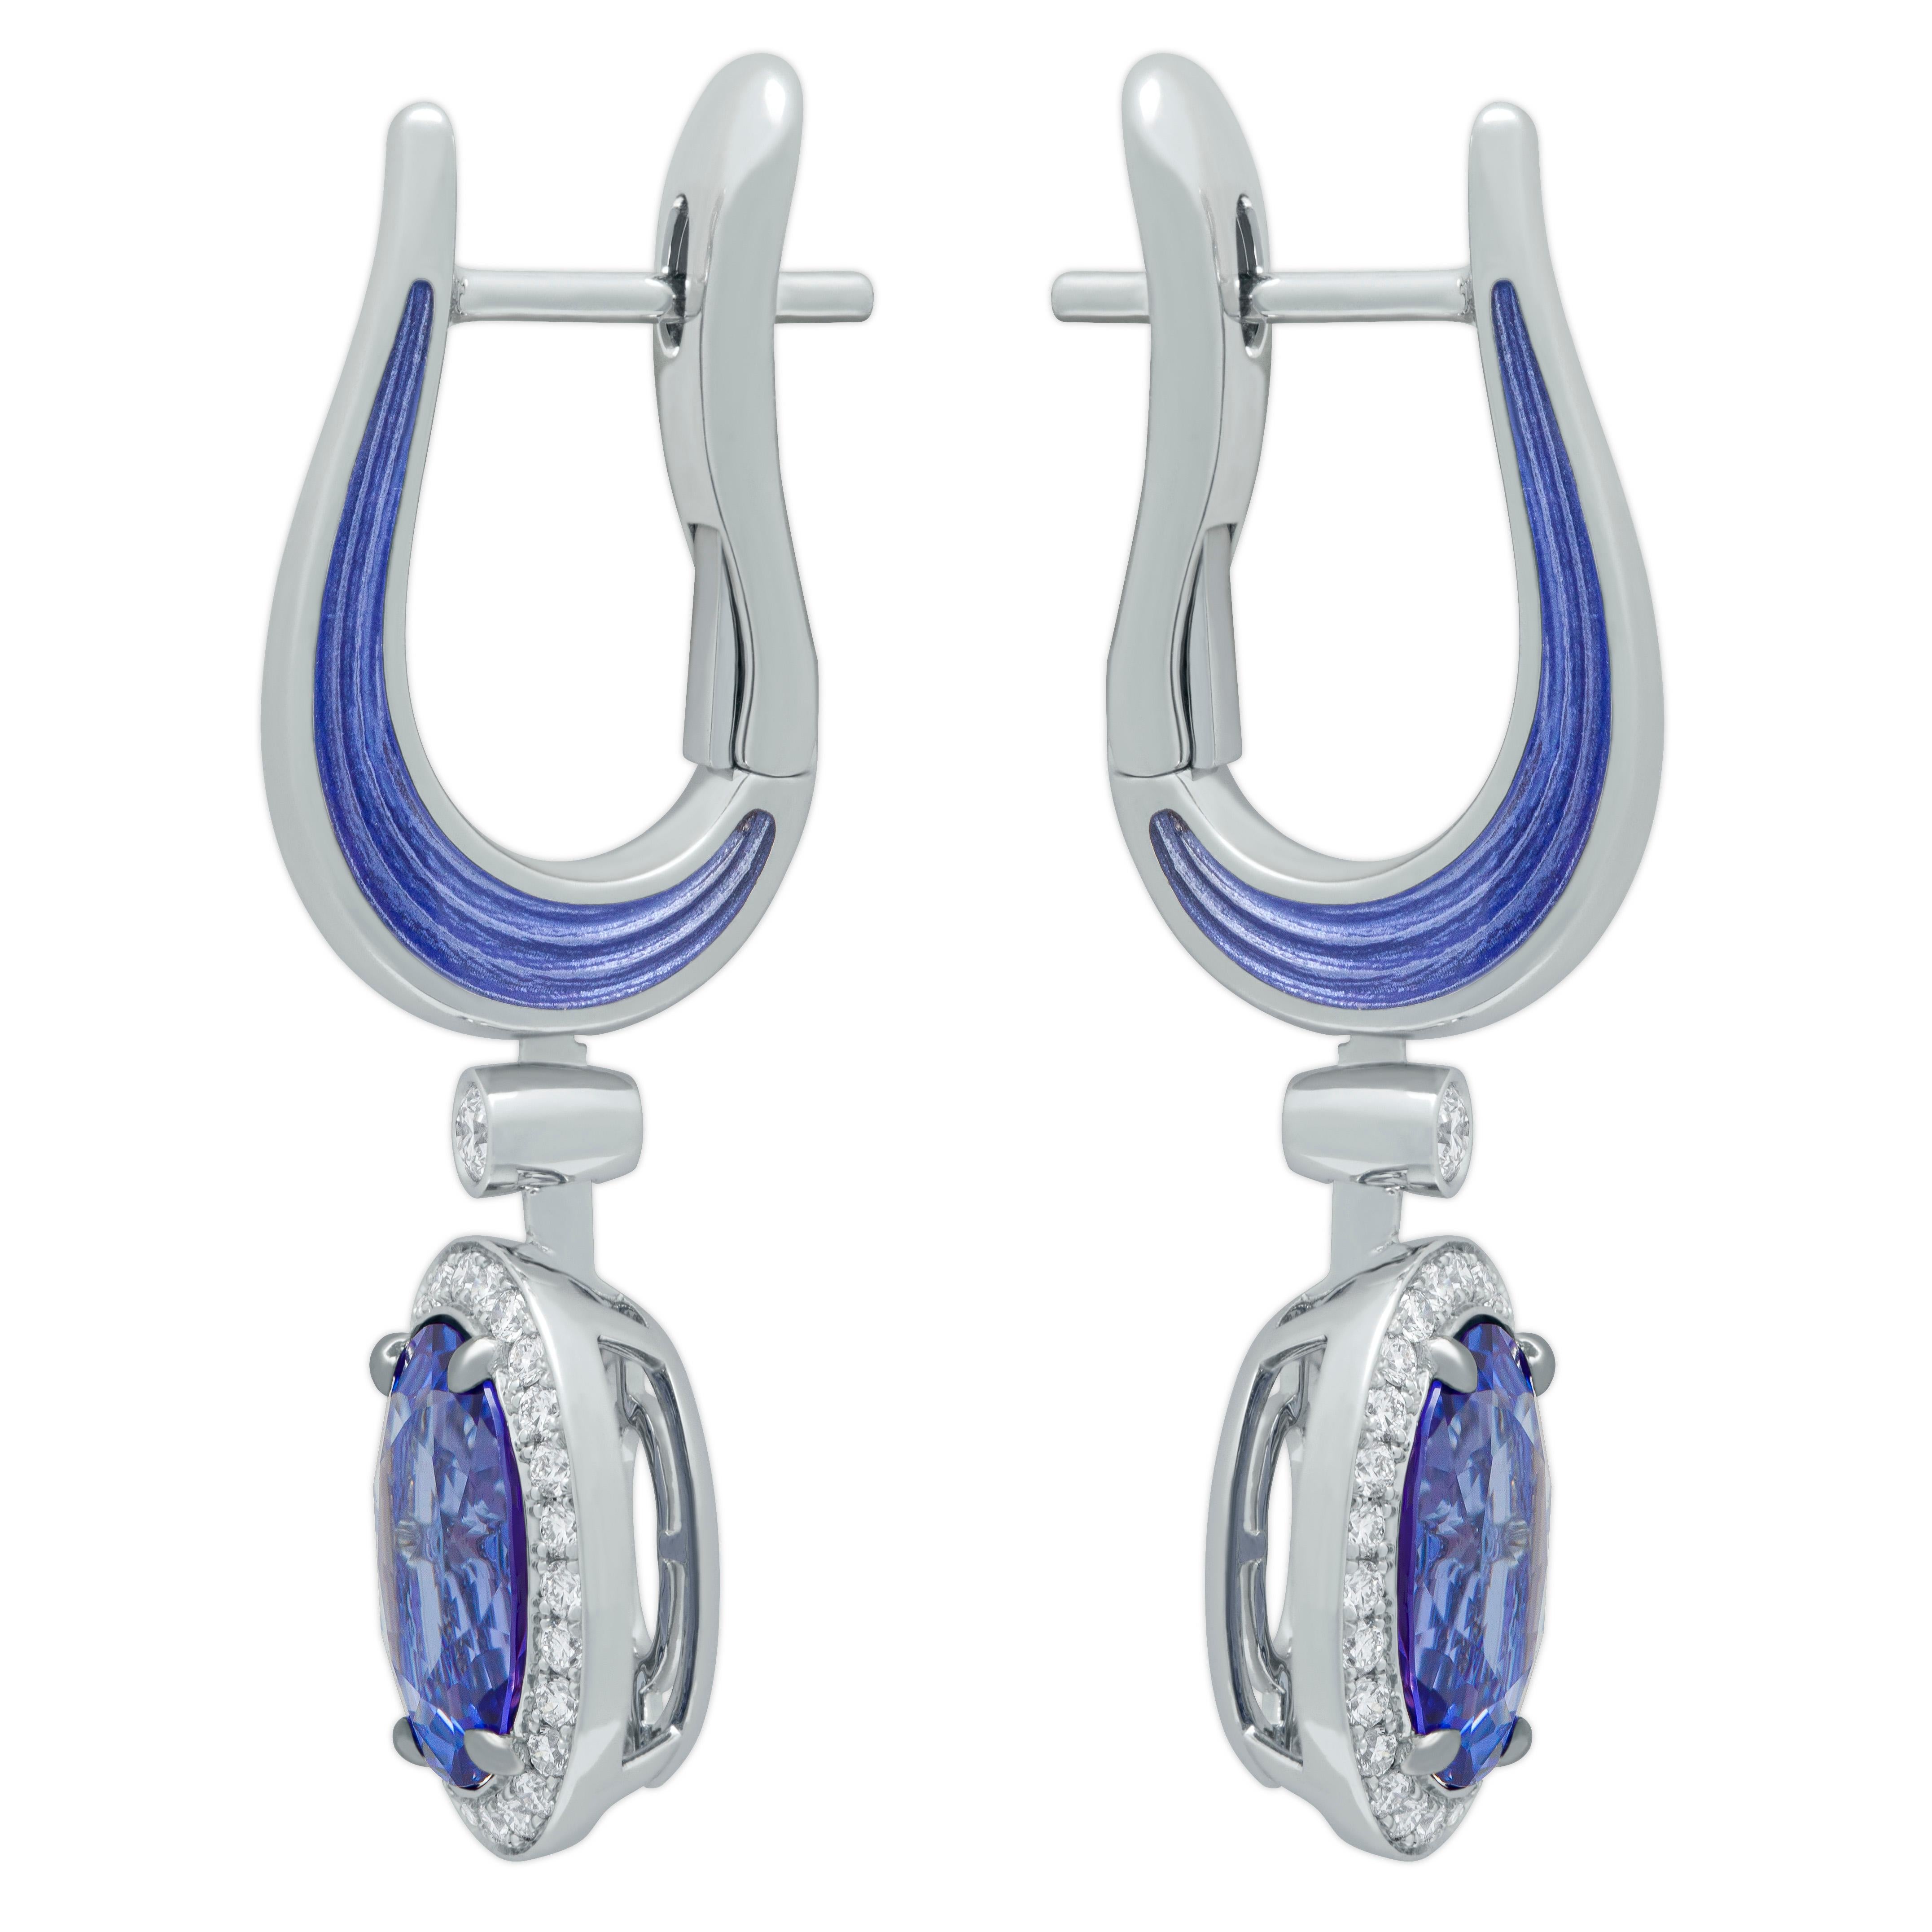 Tanzanite 3.83 Carat Diamonds Enamel 18 Karat White Gold New Classic Earrings

Elegantly styled, our newest Earrings feature 18 Karat White Gold, two Tanzanites of 3.83 Carat, 54 captivating Diamonds, and a luxe enamel finish that together create a